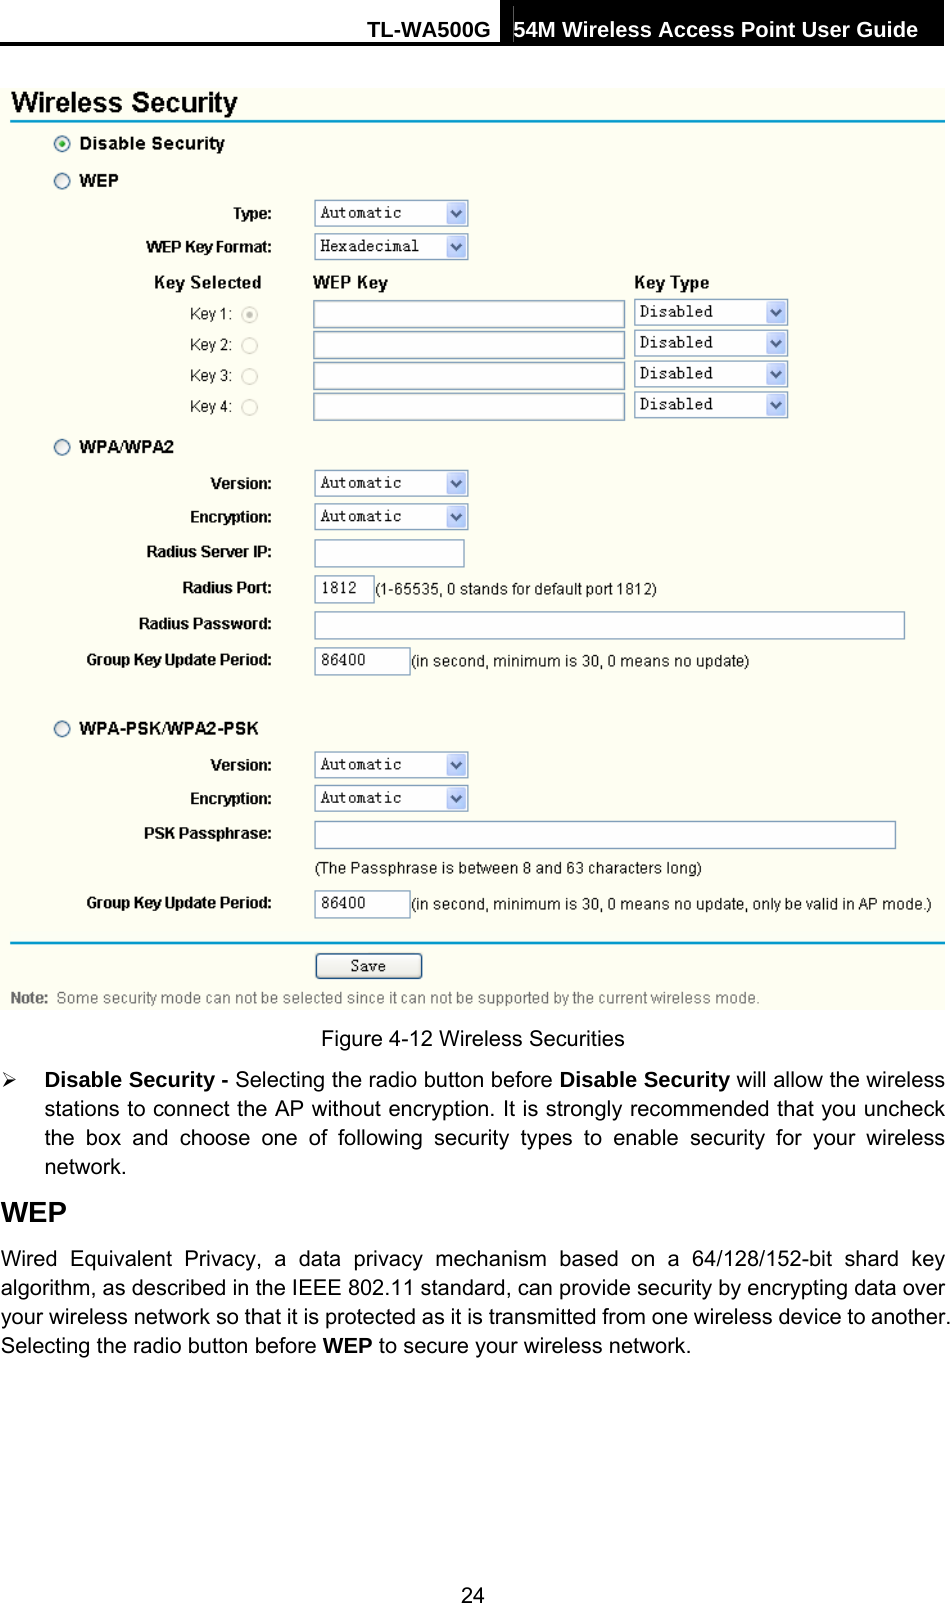 TL-WA500G 54M Wireless Access Point User Guide   Figure 4-12 Wireless Securities ¾ Disable Security - Selecting the radio button before Disable Security will allow the wireless stations to connect the AP without encryption. It is strongly recommended that you uncheck the box and choose one of following security types to enable security for your wireless network. WEP Wired Equivalent Privacy, a data privacy mechanism based on a 64/128/152-bit shard key algorithm, as described in the IEEE 802.11 standard, can provide security by encrypting data over your wireless network so that it is protected as it is transmitted from one wireless device to another. Selecting the radio button before WEP to secure your wireless network. 24 